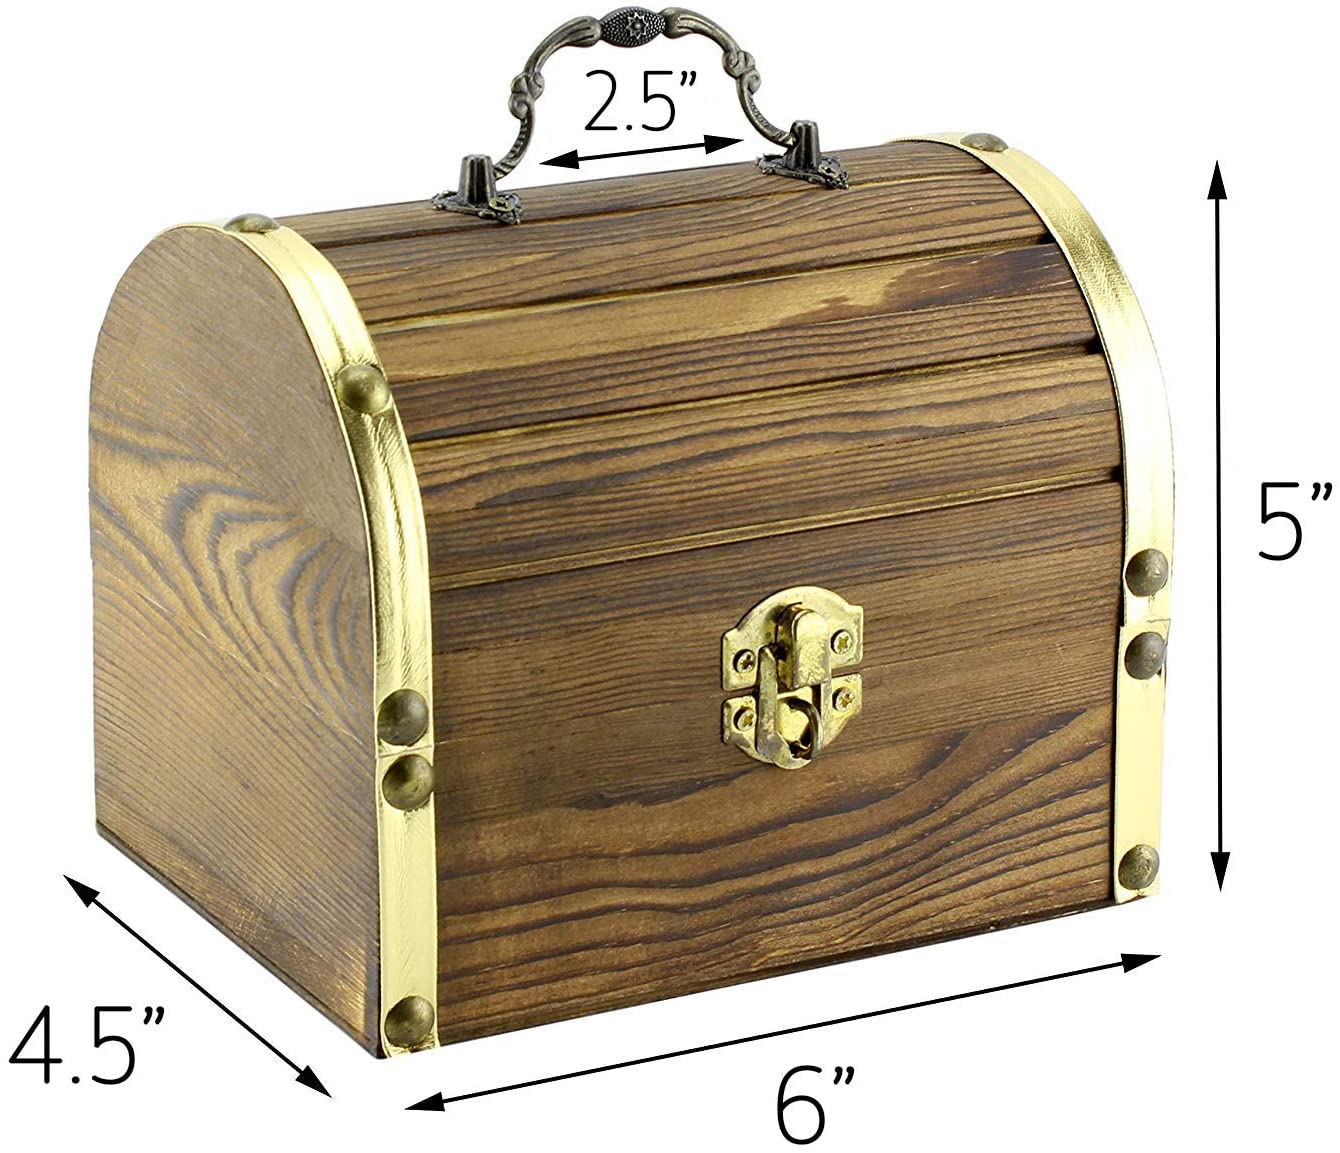 Wooden Pirate Treasure Chest with 240 Colored Jewels (Plastic Gems)